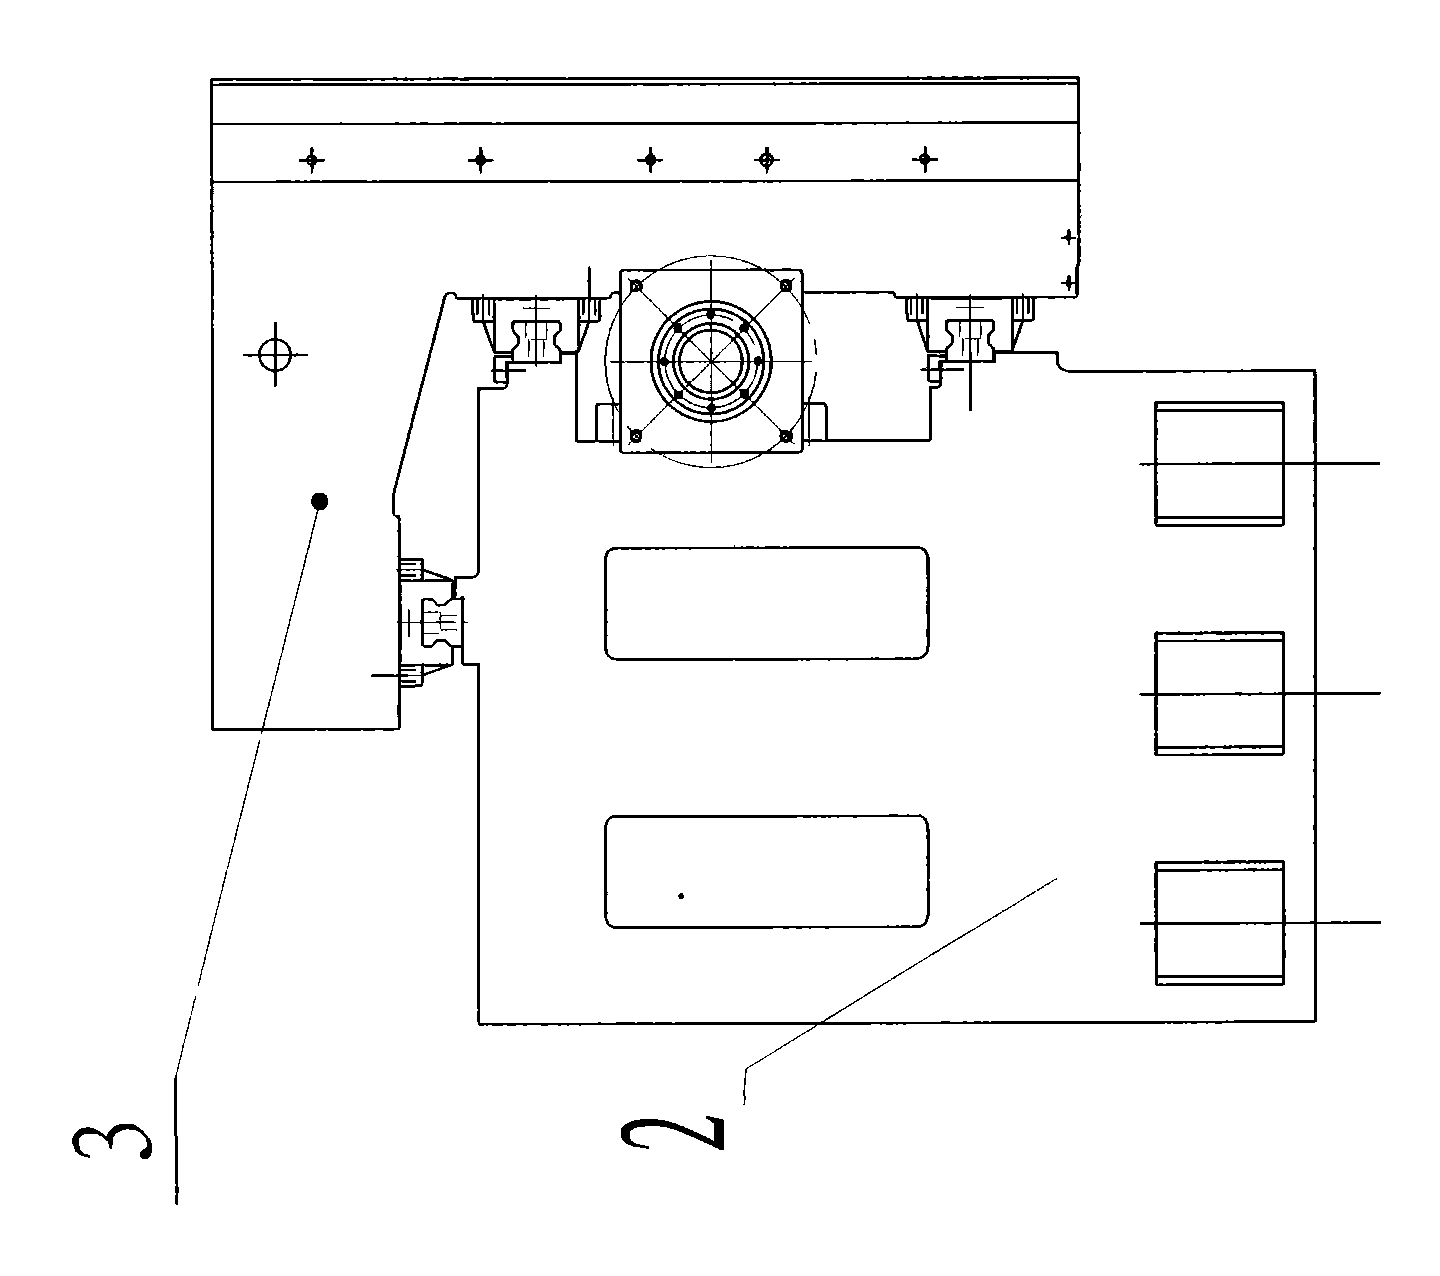 Disk workpiece processing method and structure